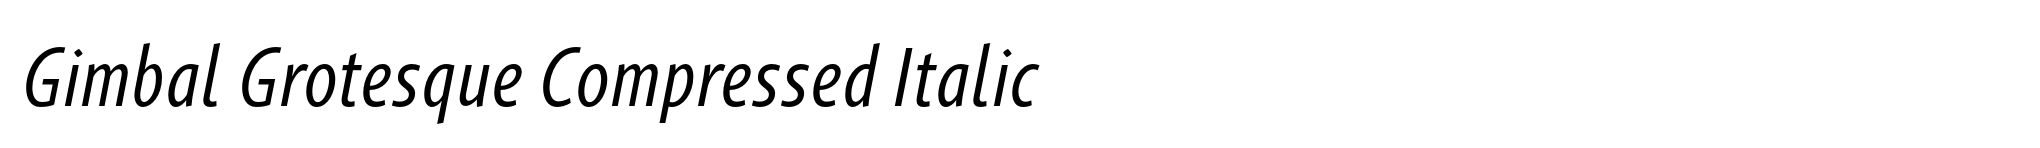 Gimbal Grotesque Compressed Italic image